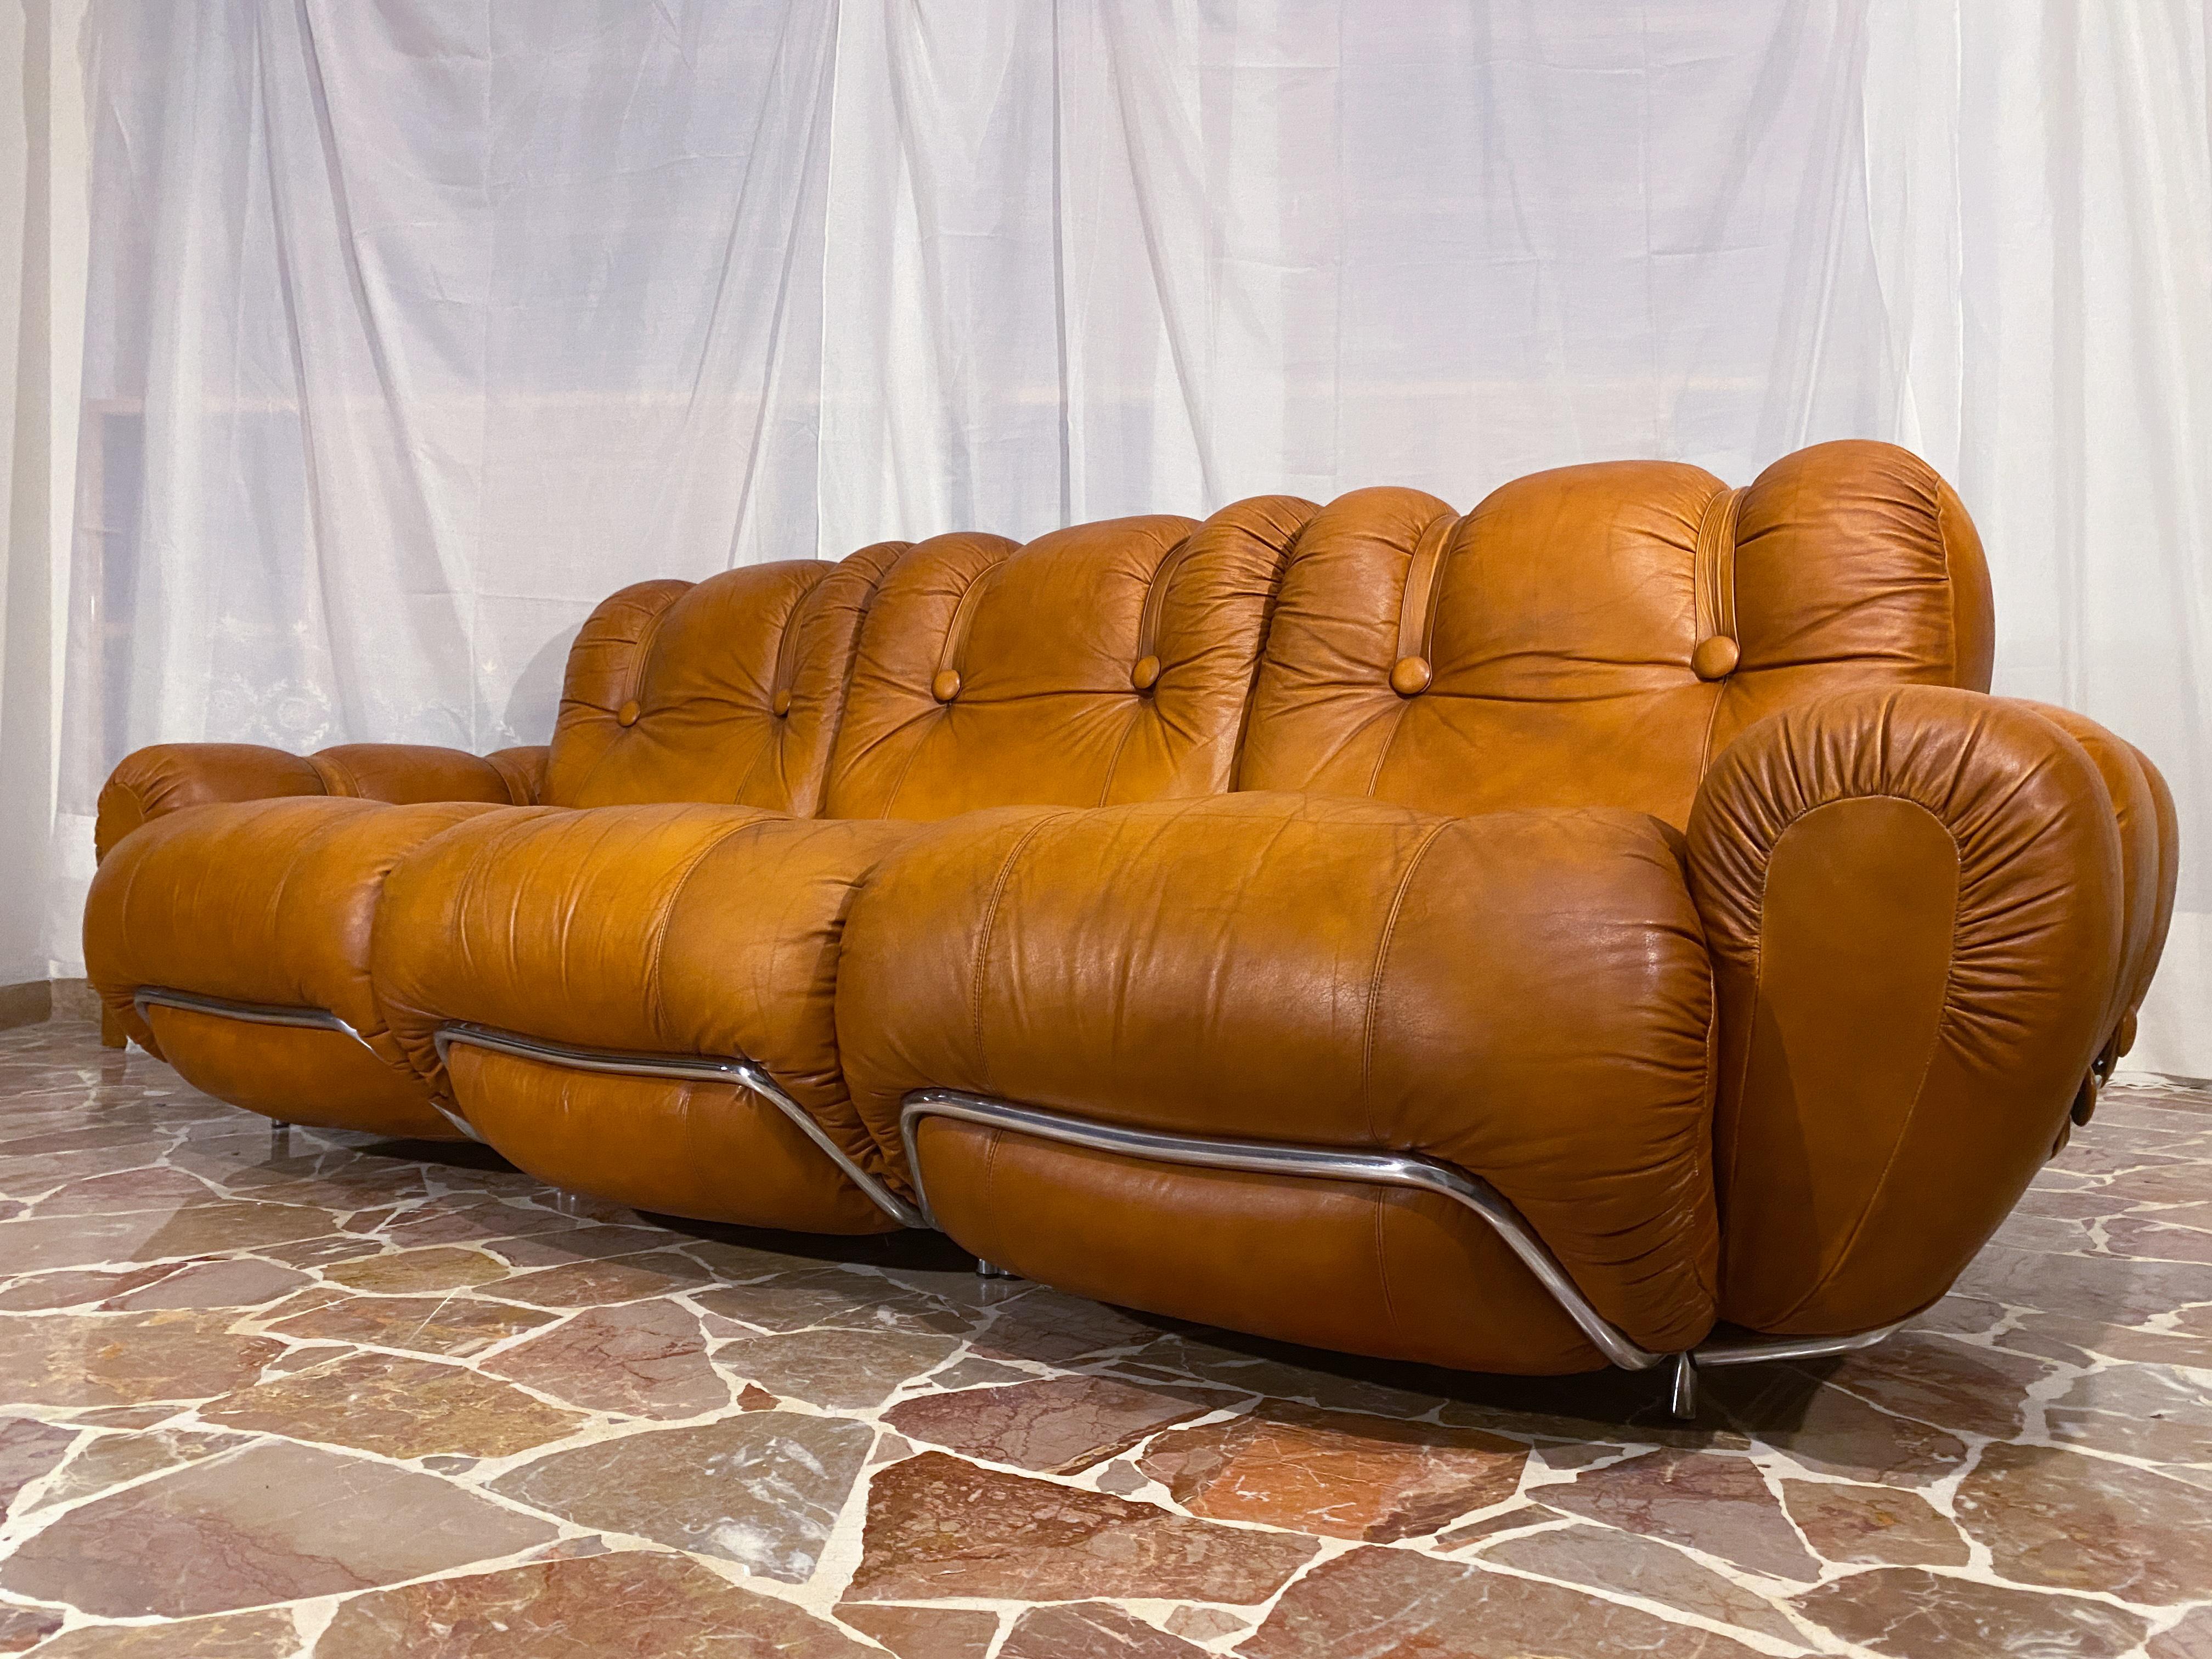 Italian Mid-Century Space Age Living Room Set in Natural Leather, 1970 For Sale 12